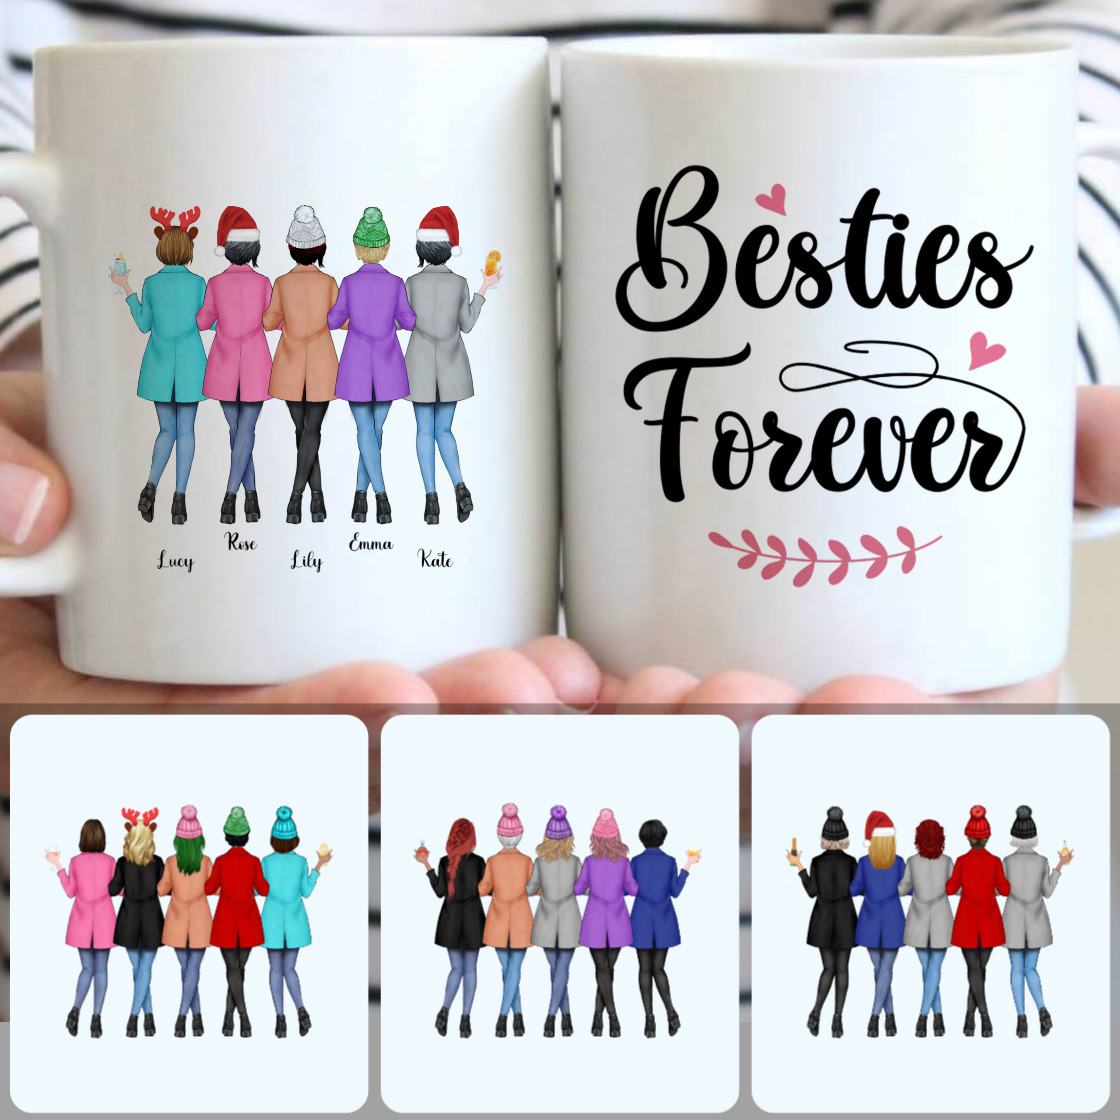 Personalized Mug, Special Christmas Gifts, 5 Besties Forever Customized Coffee Mug With Names